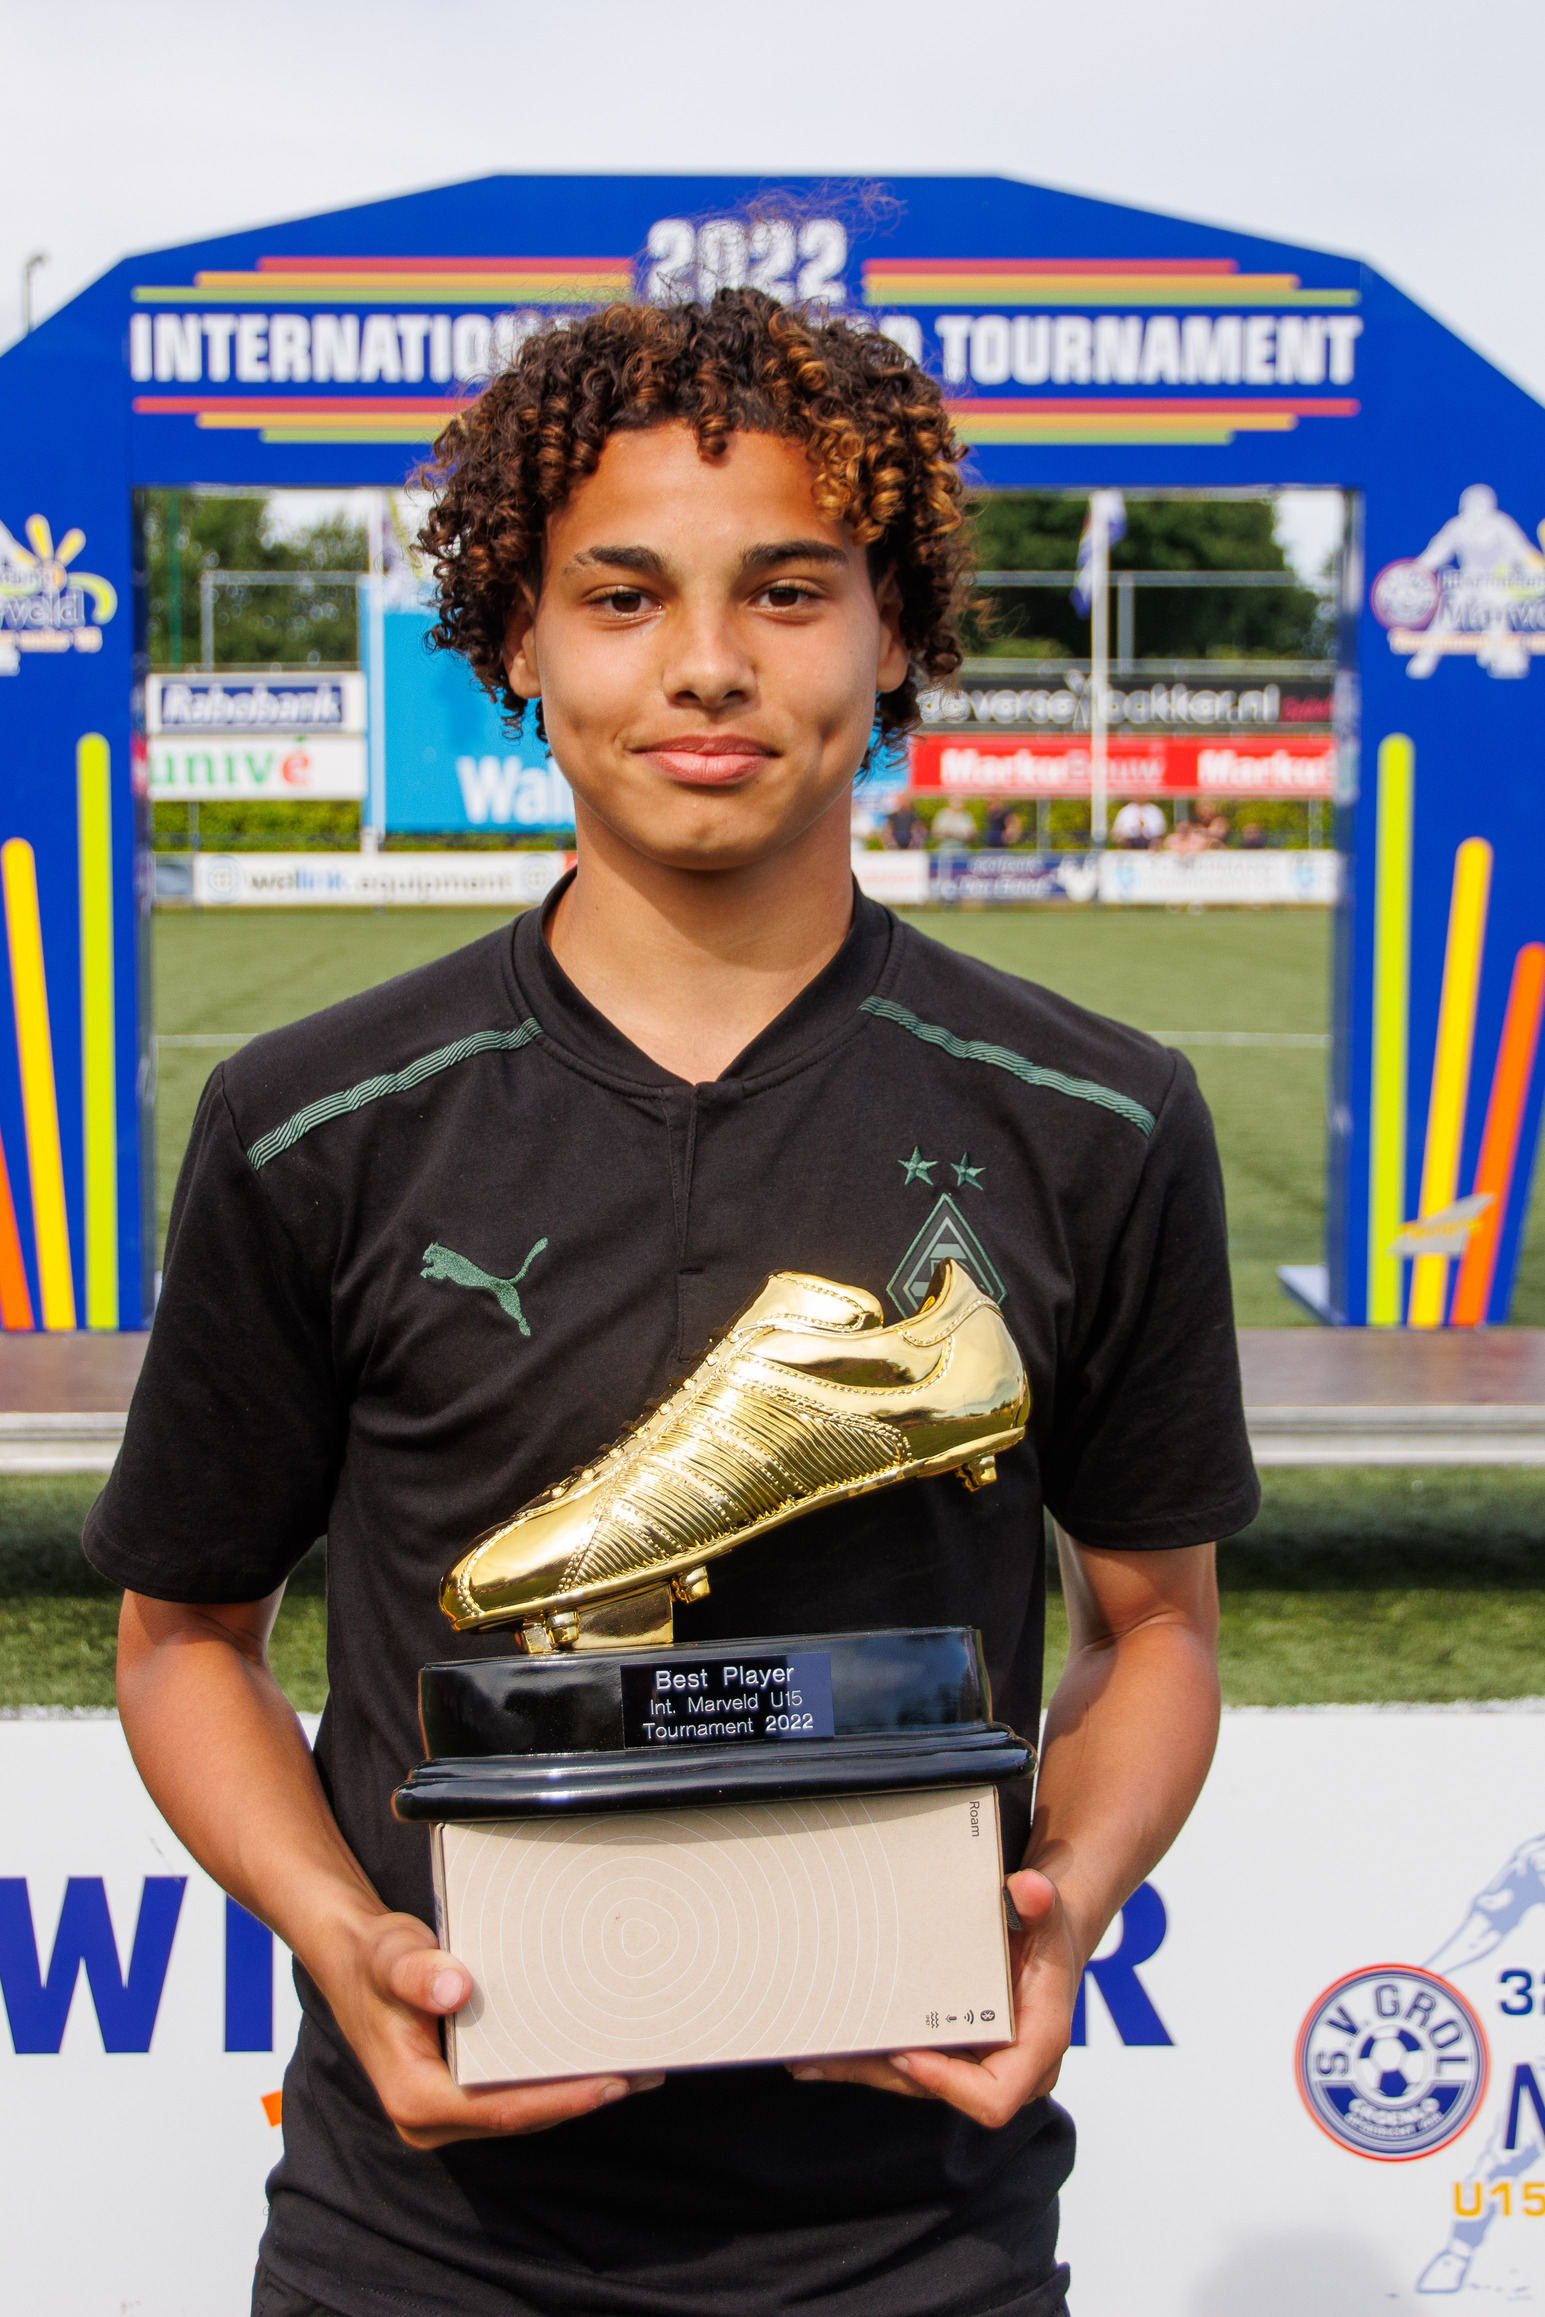 Marveld Tournament 2022 - Presentation of the prices - Killian Sauck, best player of the tournament